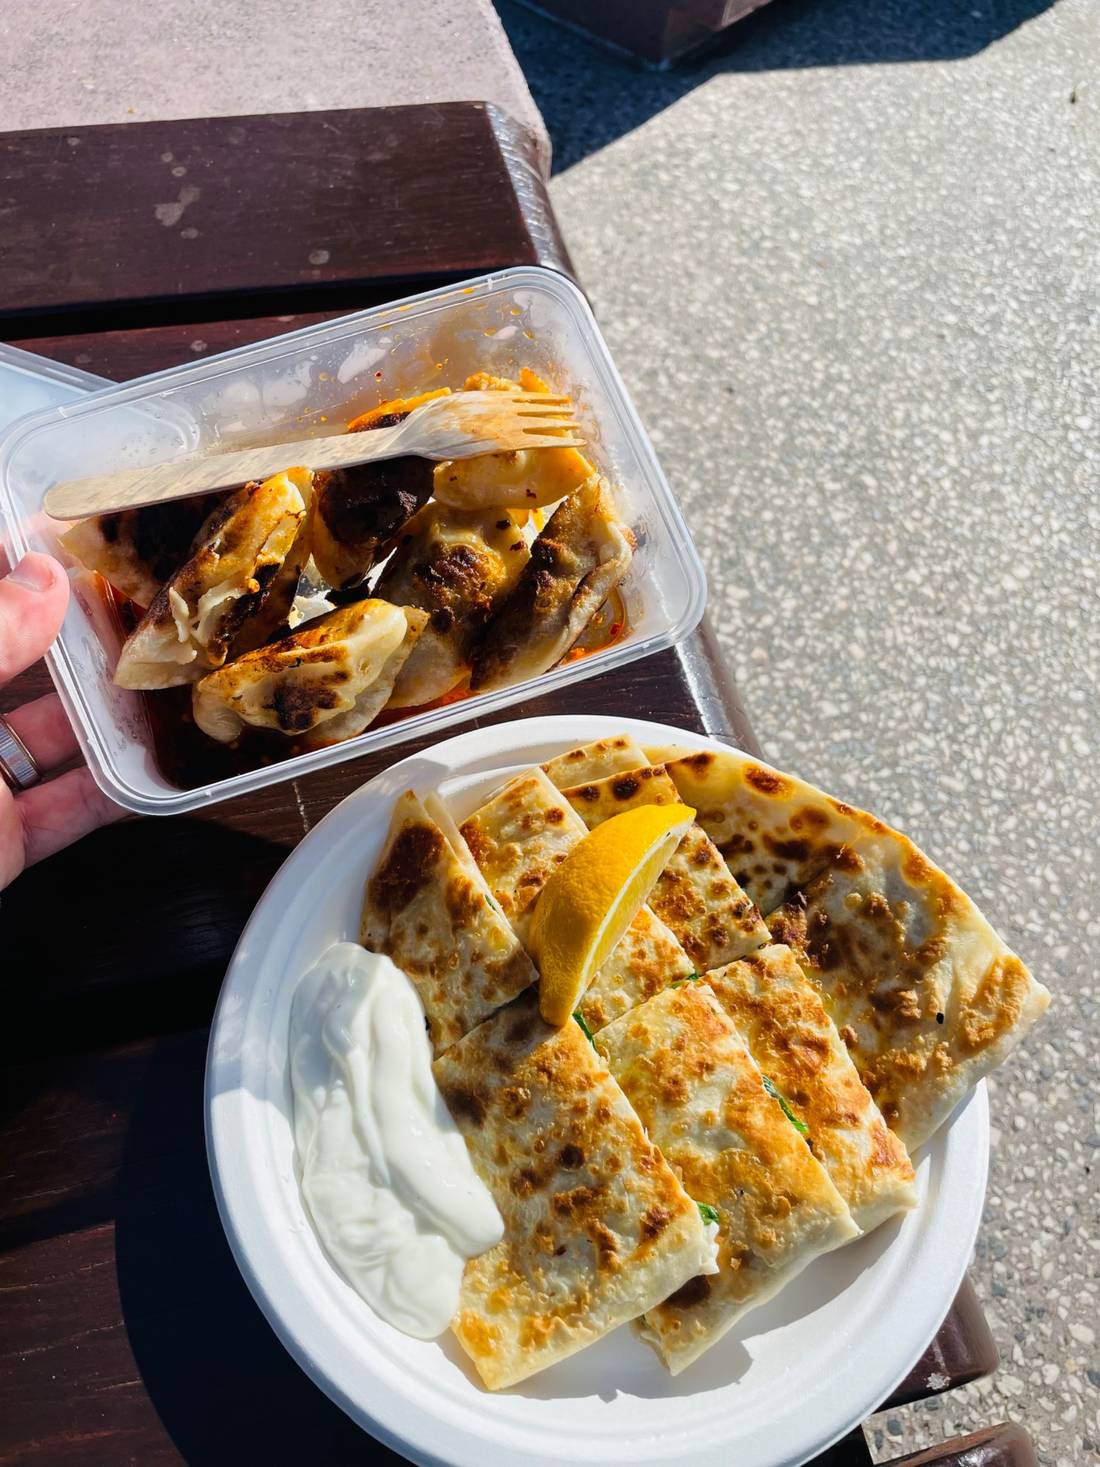 Pork pan fried dumplings, and a Mushroom, Feta, and Spinach Gozleme. For those that are unfamiliar, Gozleme is a traditional Turkish Flatbread.. Absolutely delicious.